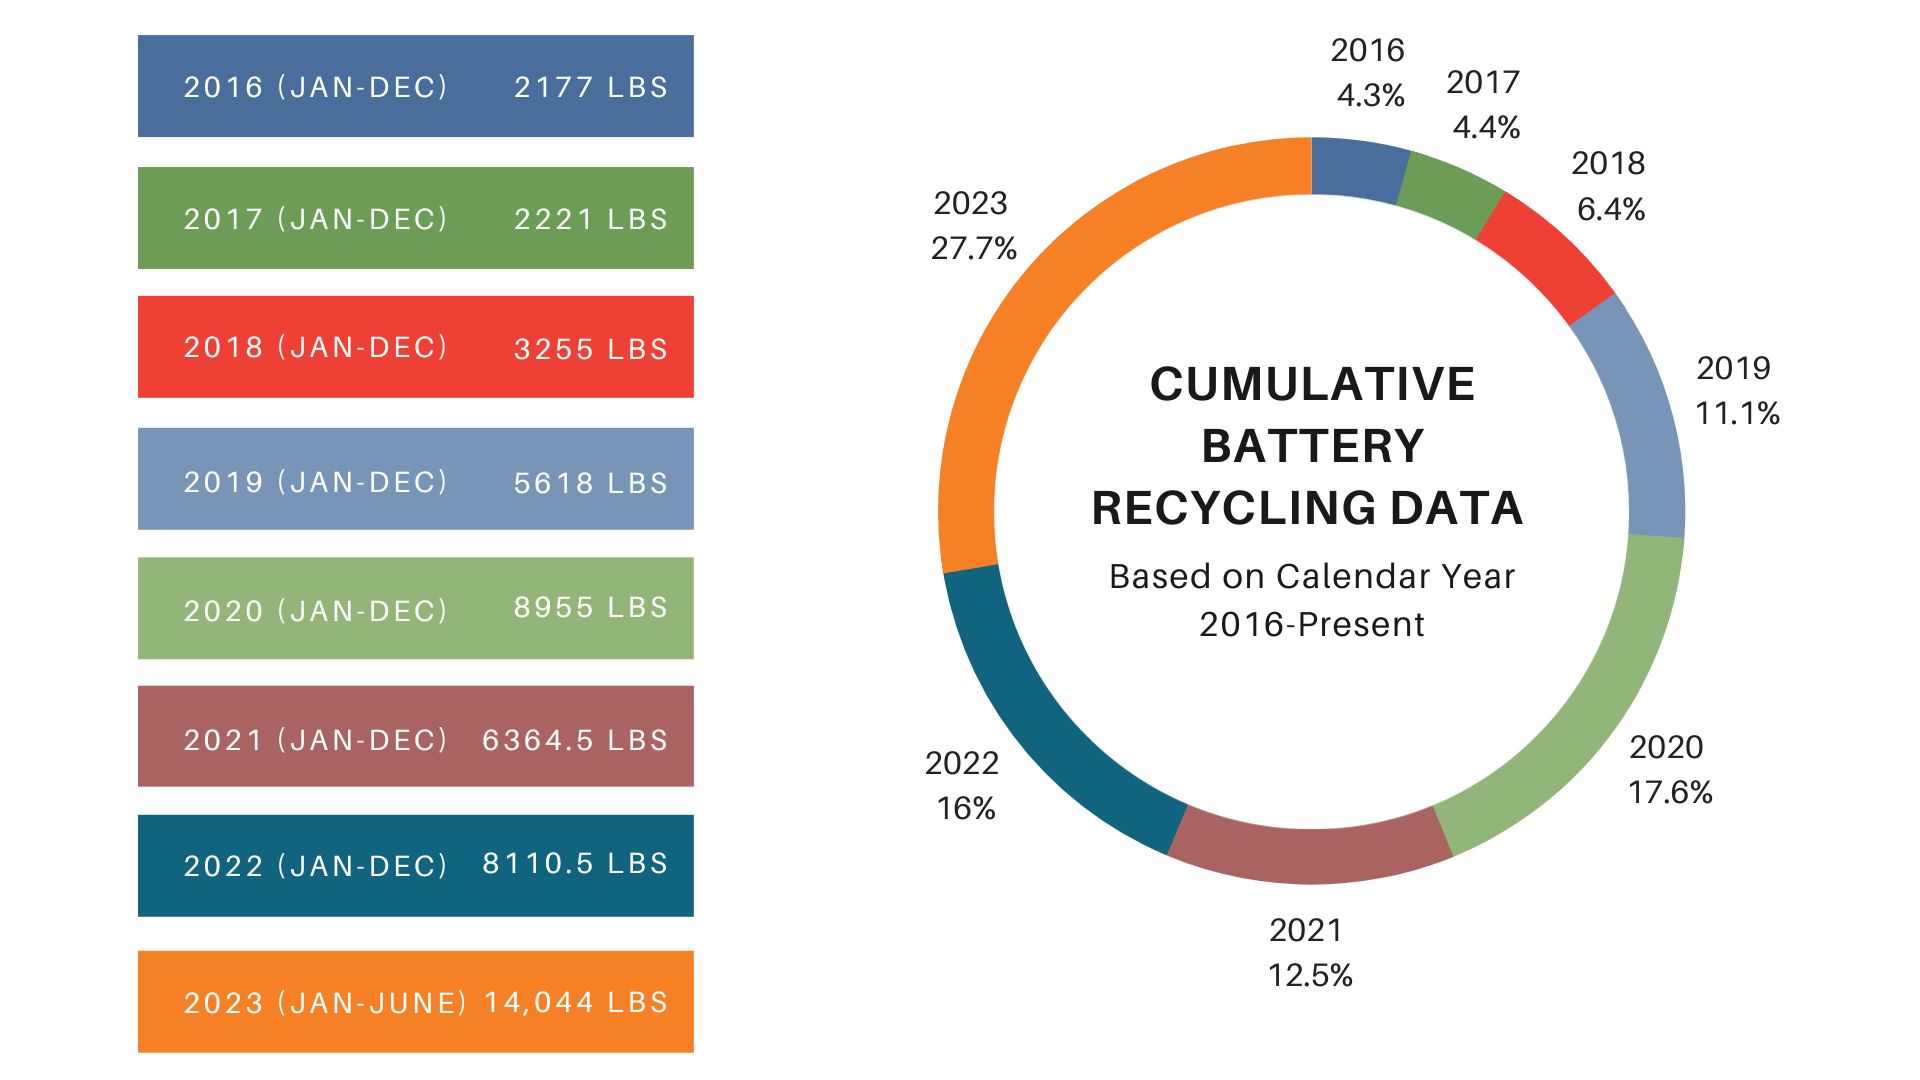 Cumulative Battery Recycling Pie Chart by Calendar Year 2016-present 2016: 2177 pounds 4.3% 2017: 2221 pounds 4.4% 2018: 3255 pounds 6.4% 2019: 5618 pounds 11.1% 2020: 8955 pounds 17.6% 2021: 6364.5 pounds 12.5% 2022: 8110.5 pounds 16% 2023: 14,044 pounds 27.7%